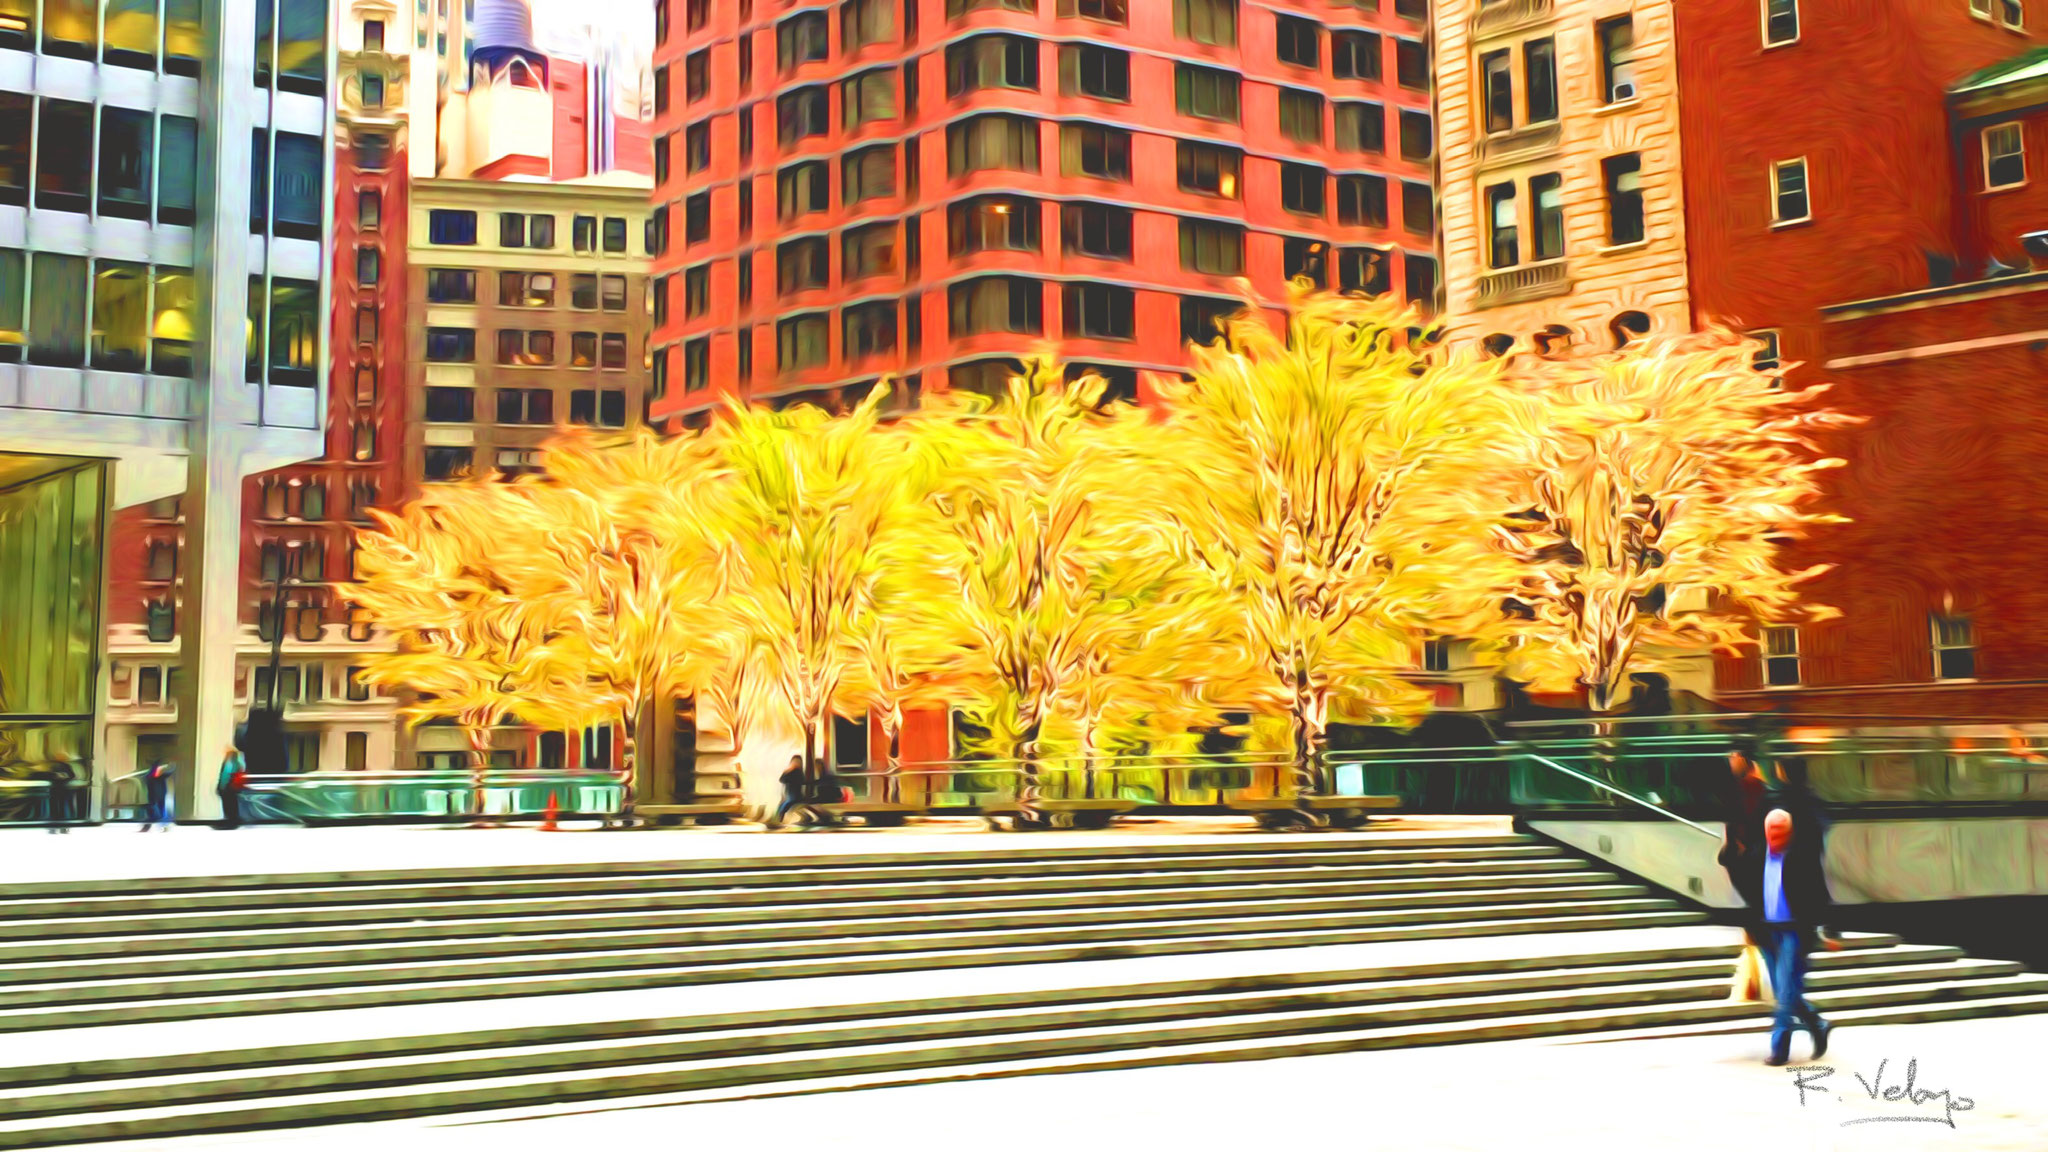 "PARK NEAR CHASE BUILDING IN DOWNTOWN MANHATTAN" [Created: 3/15/2020]